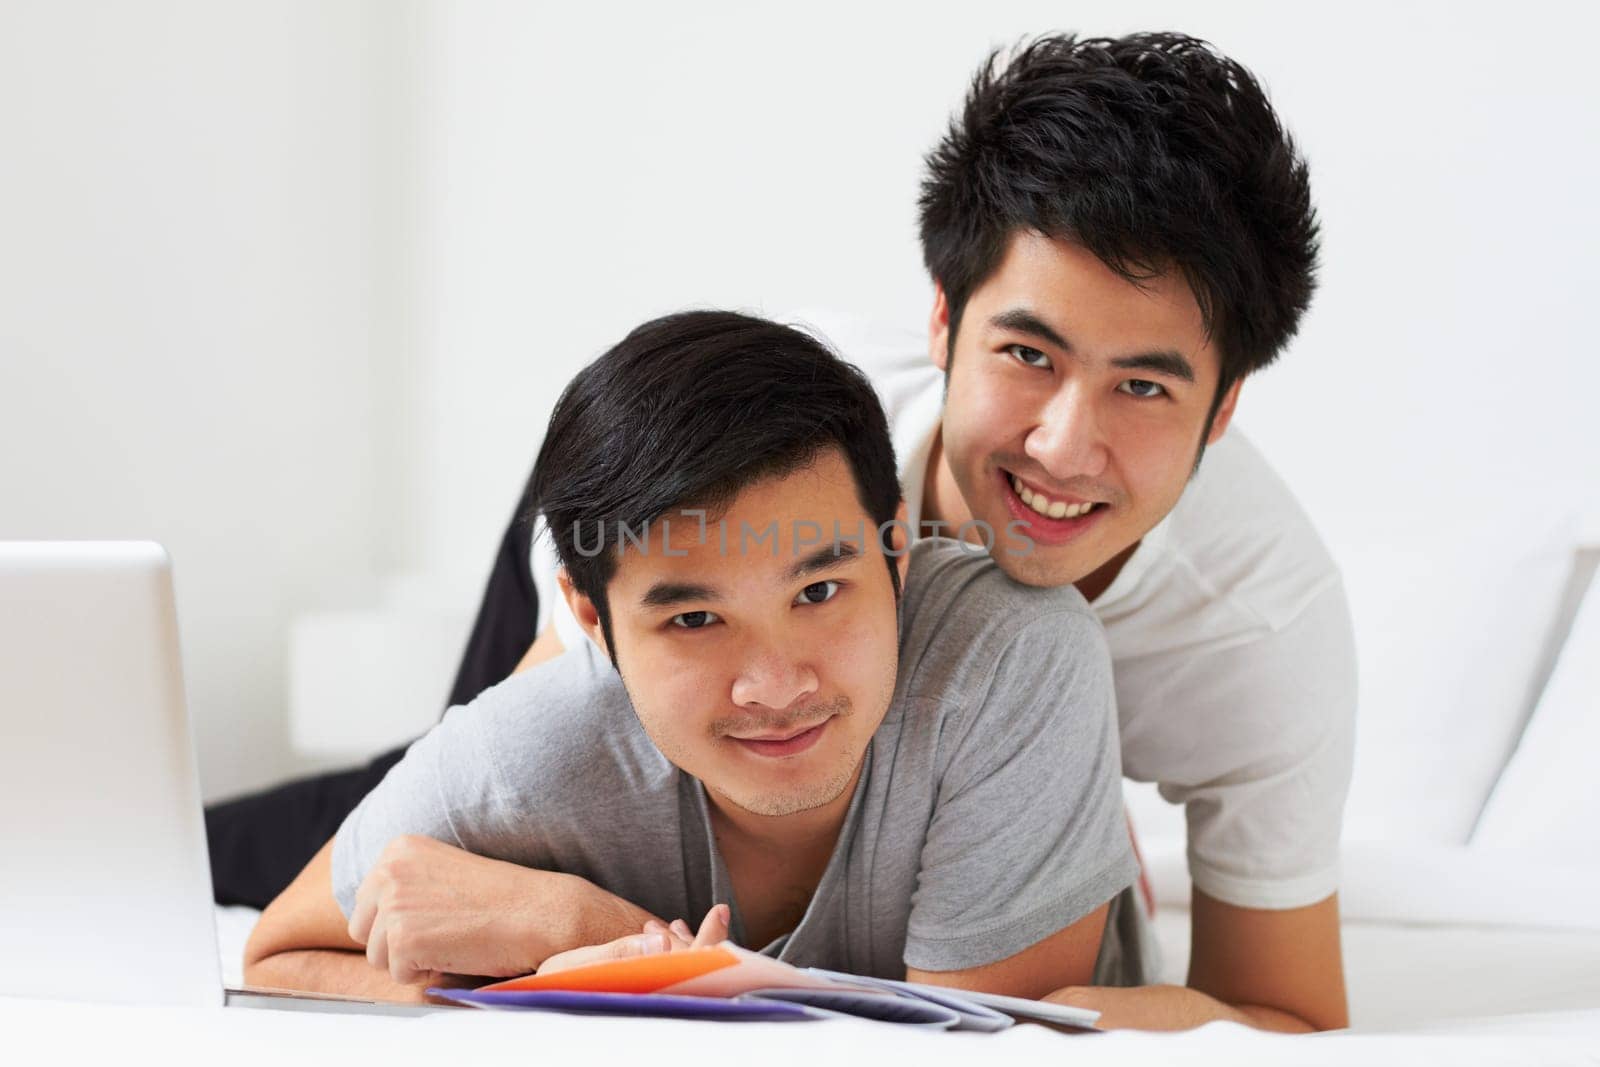 Portrait, lgbt and love with an asian couple learning together in their home while bonding over education. Study, happy or smile with a gay man and partner in a house, studying as university students by YuriArcurs